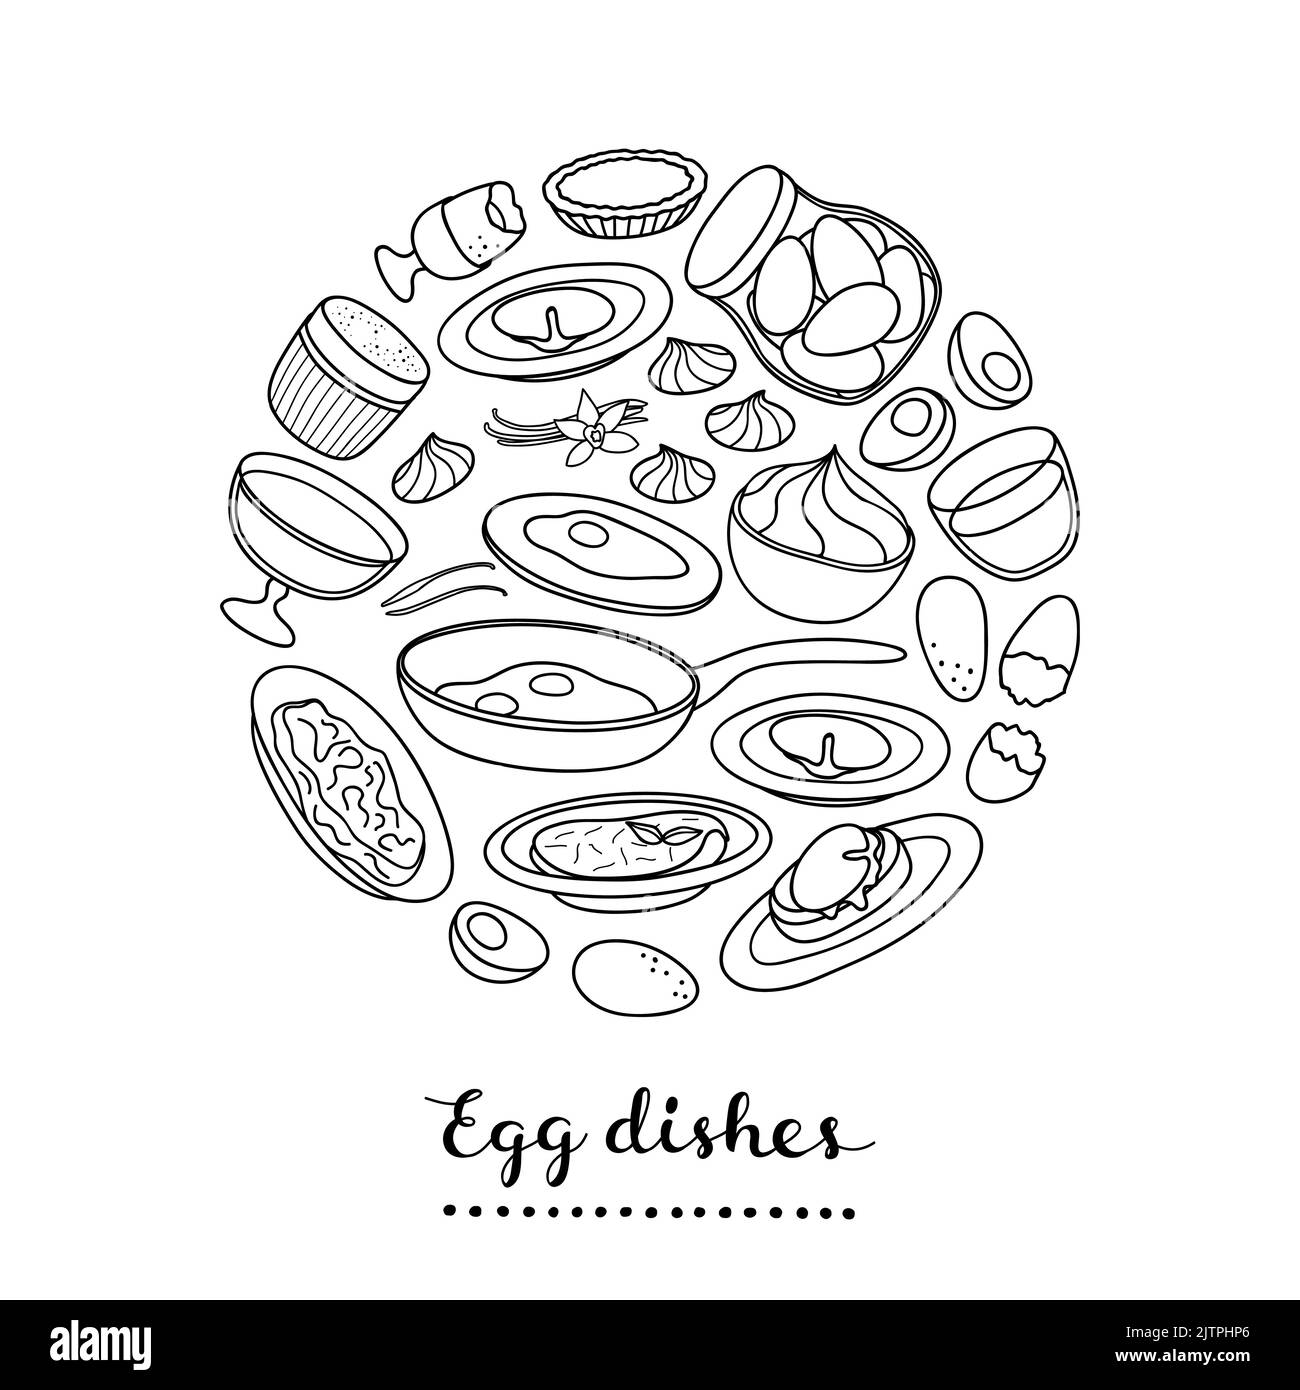 Collection of various hand drawn outline egg dishes composed in circle shape with lettering. Stock Vector